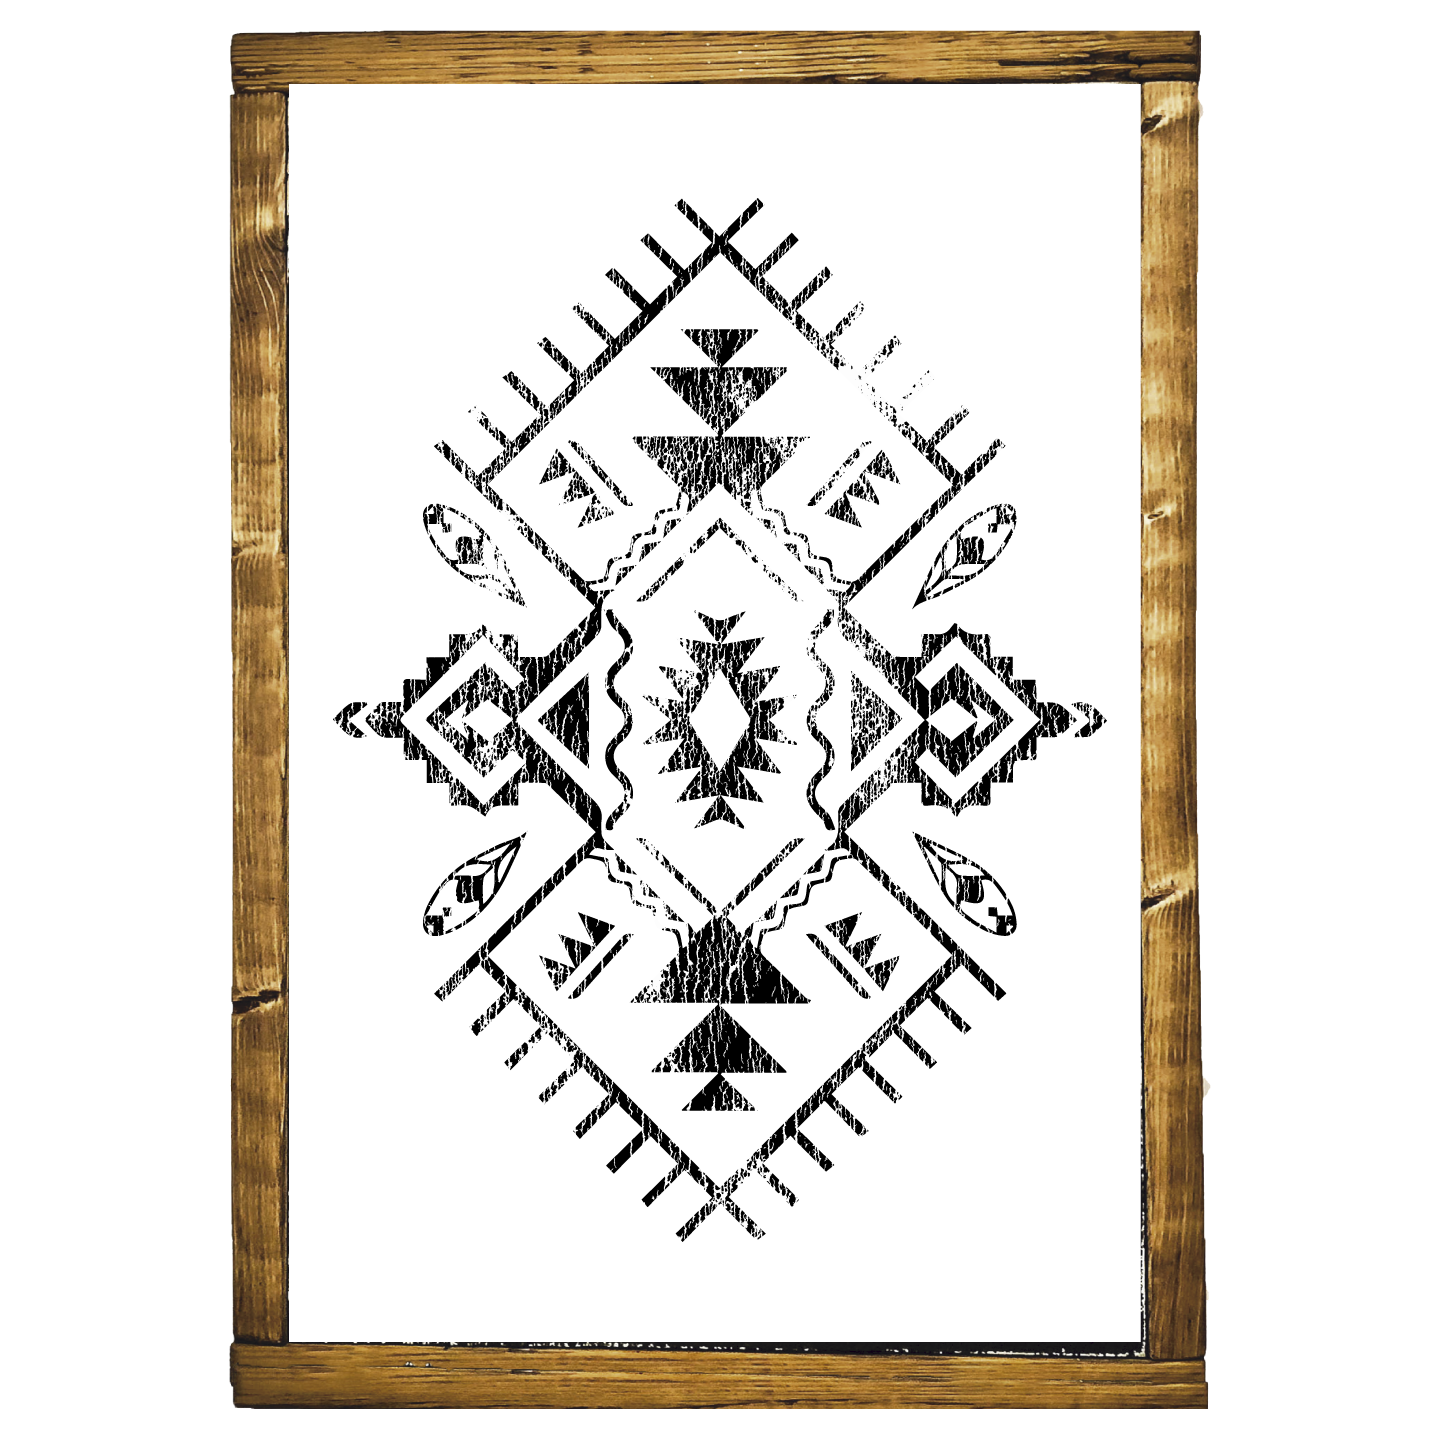 Black rustic faded abstract southwestern style print on white background with dark wood frame.